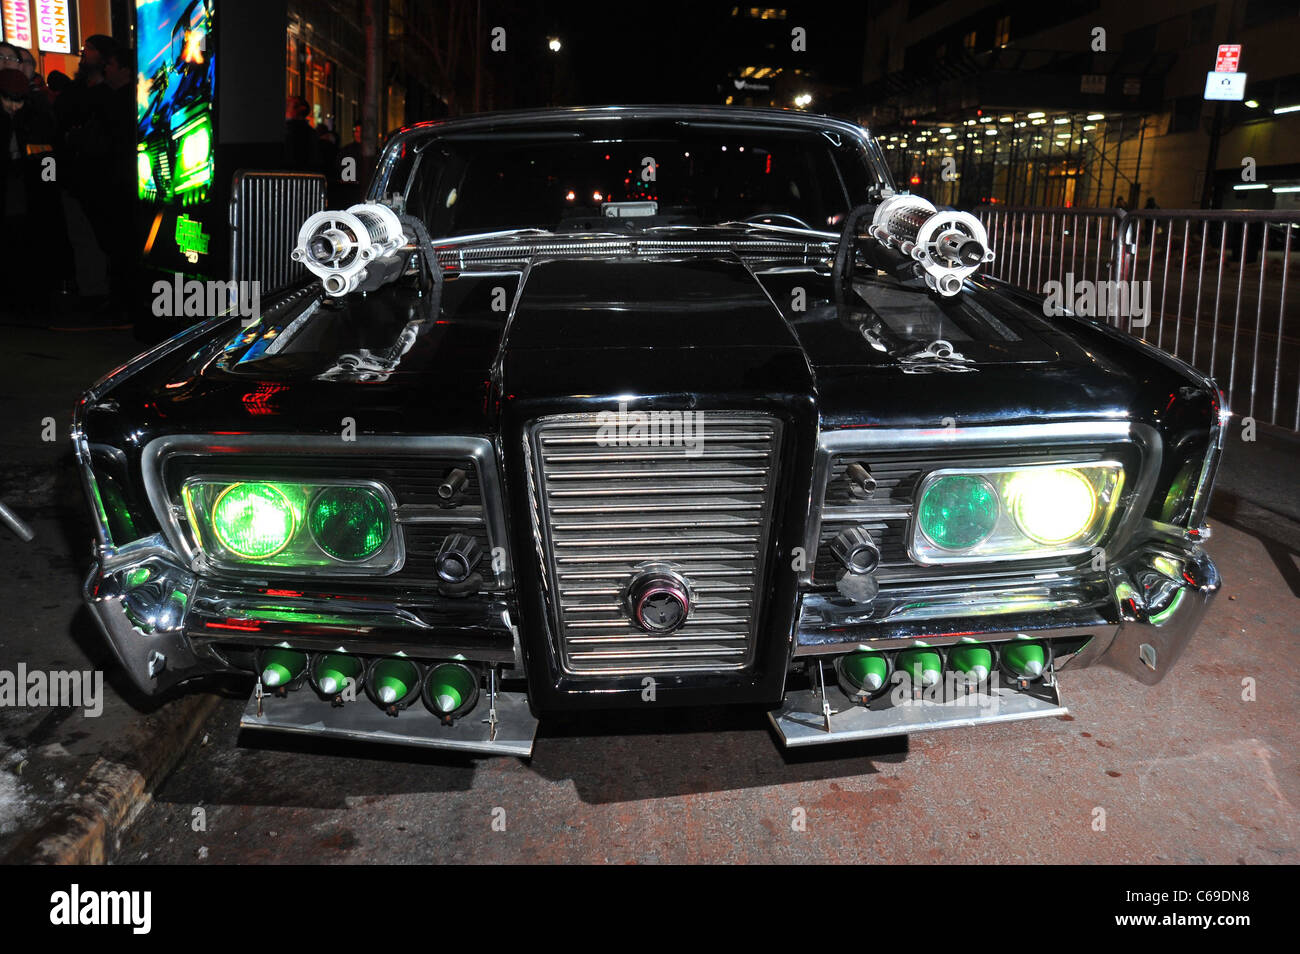 Black Beauty at a public appearance for THE GREEN HORNET Photo Op with Seth Rogen and The Black Beauty Car, AMC 34th Street Theater, New York, NY January 6, 2011. Photo By: Gregorio T. Binuya/Everett Collection Stock Photo